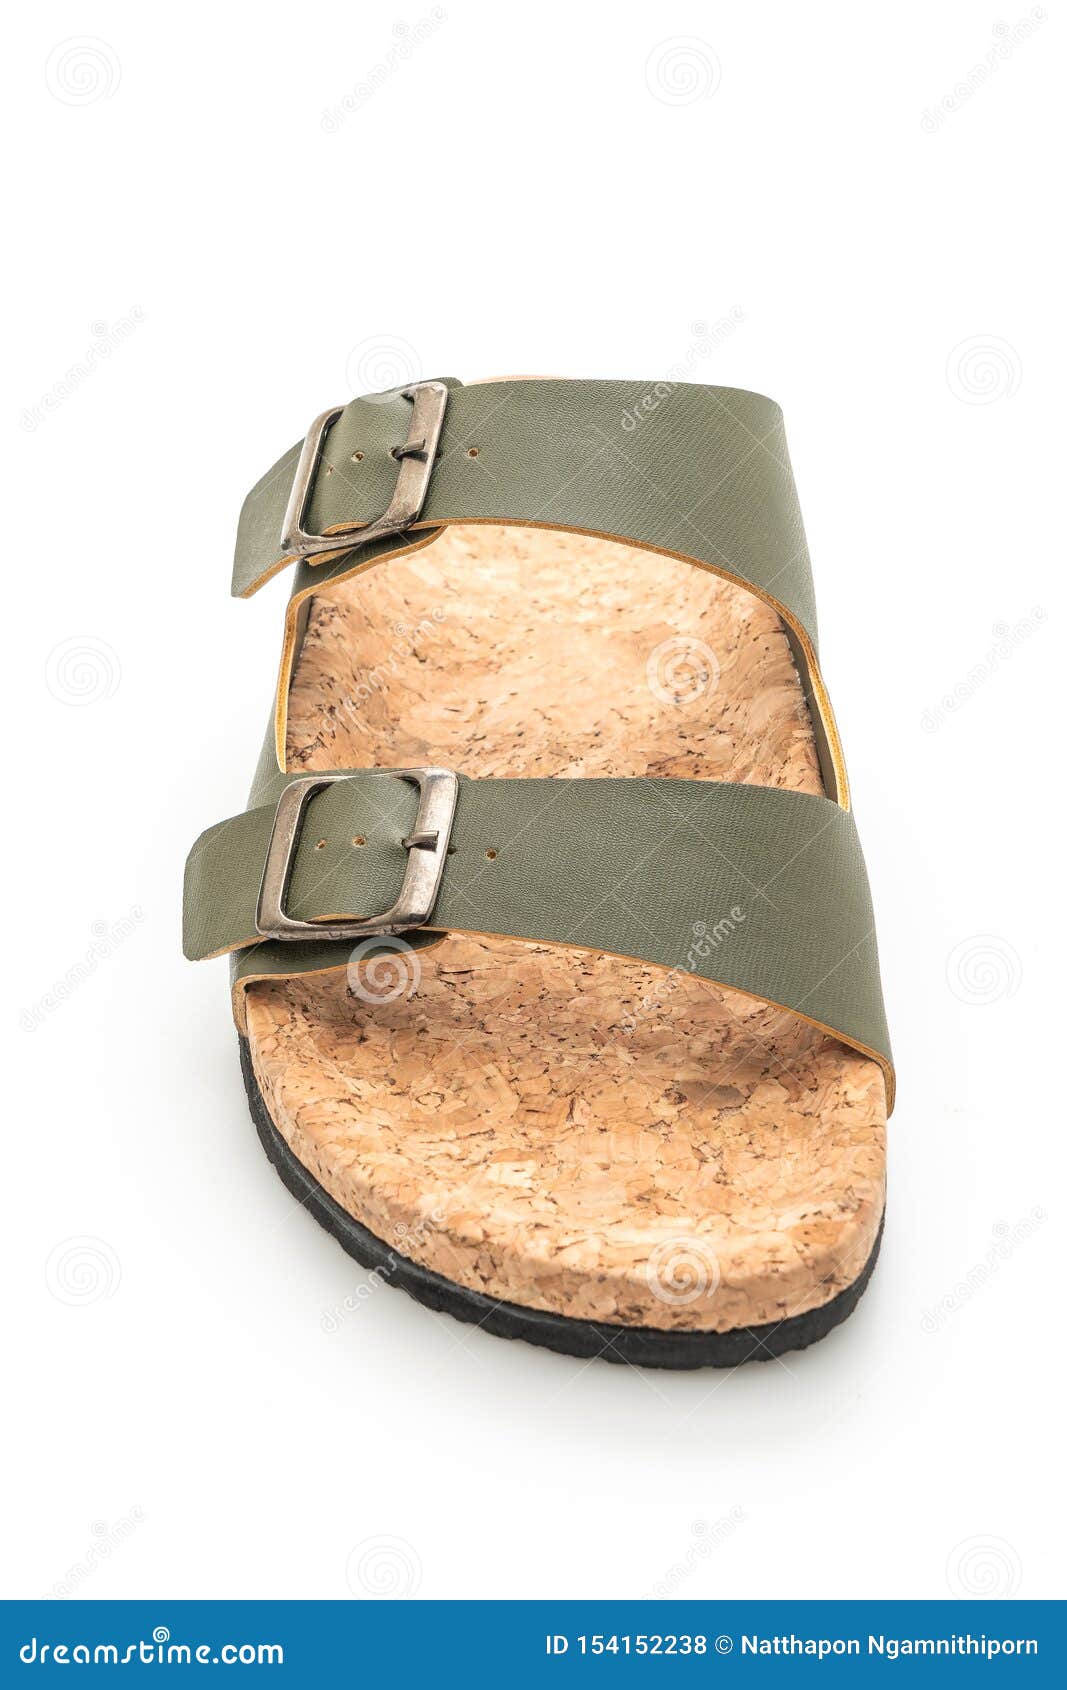 Men S and Women S (unisex) Fashion Leather Sandals Stock Photo - Image ...